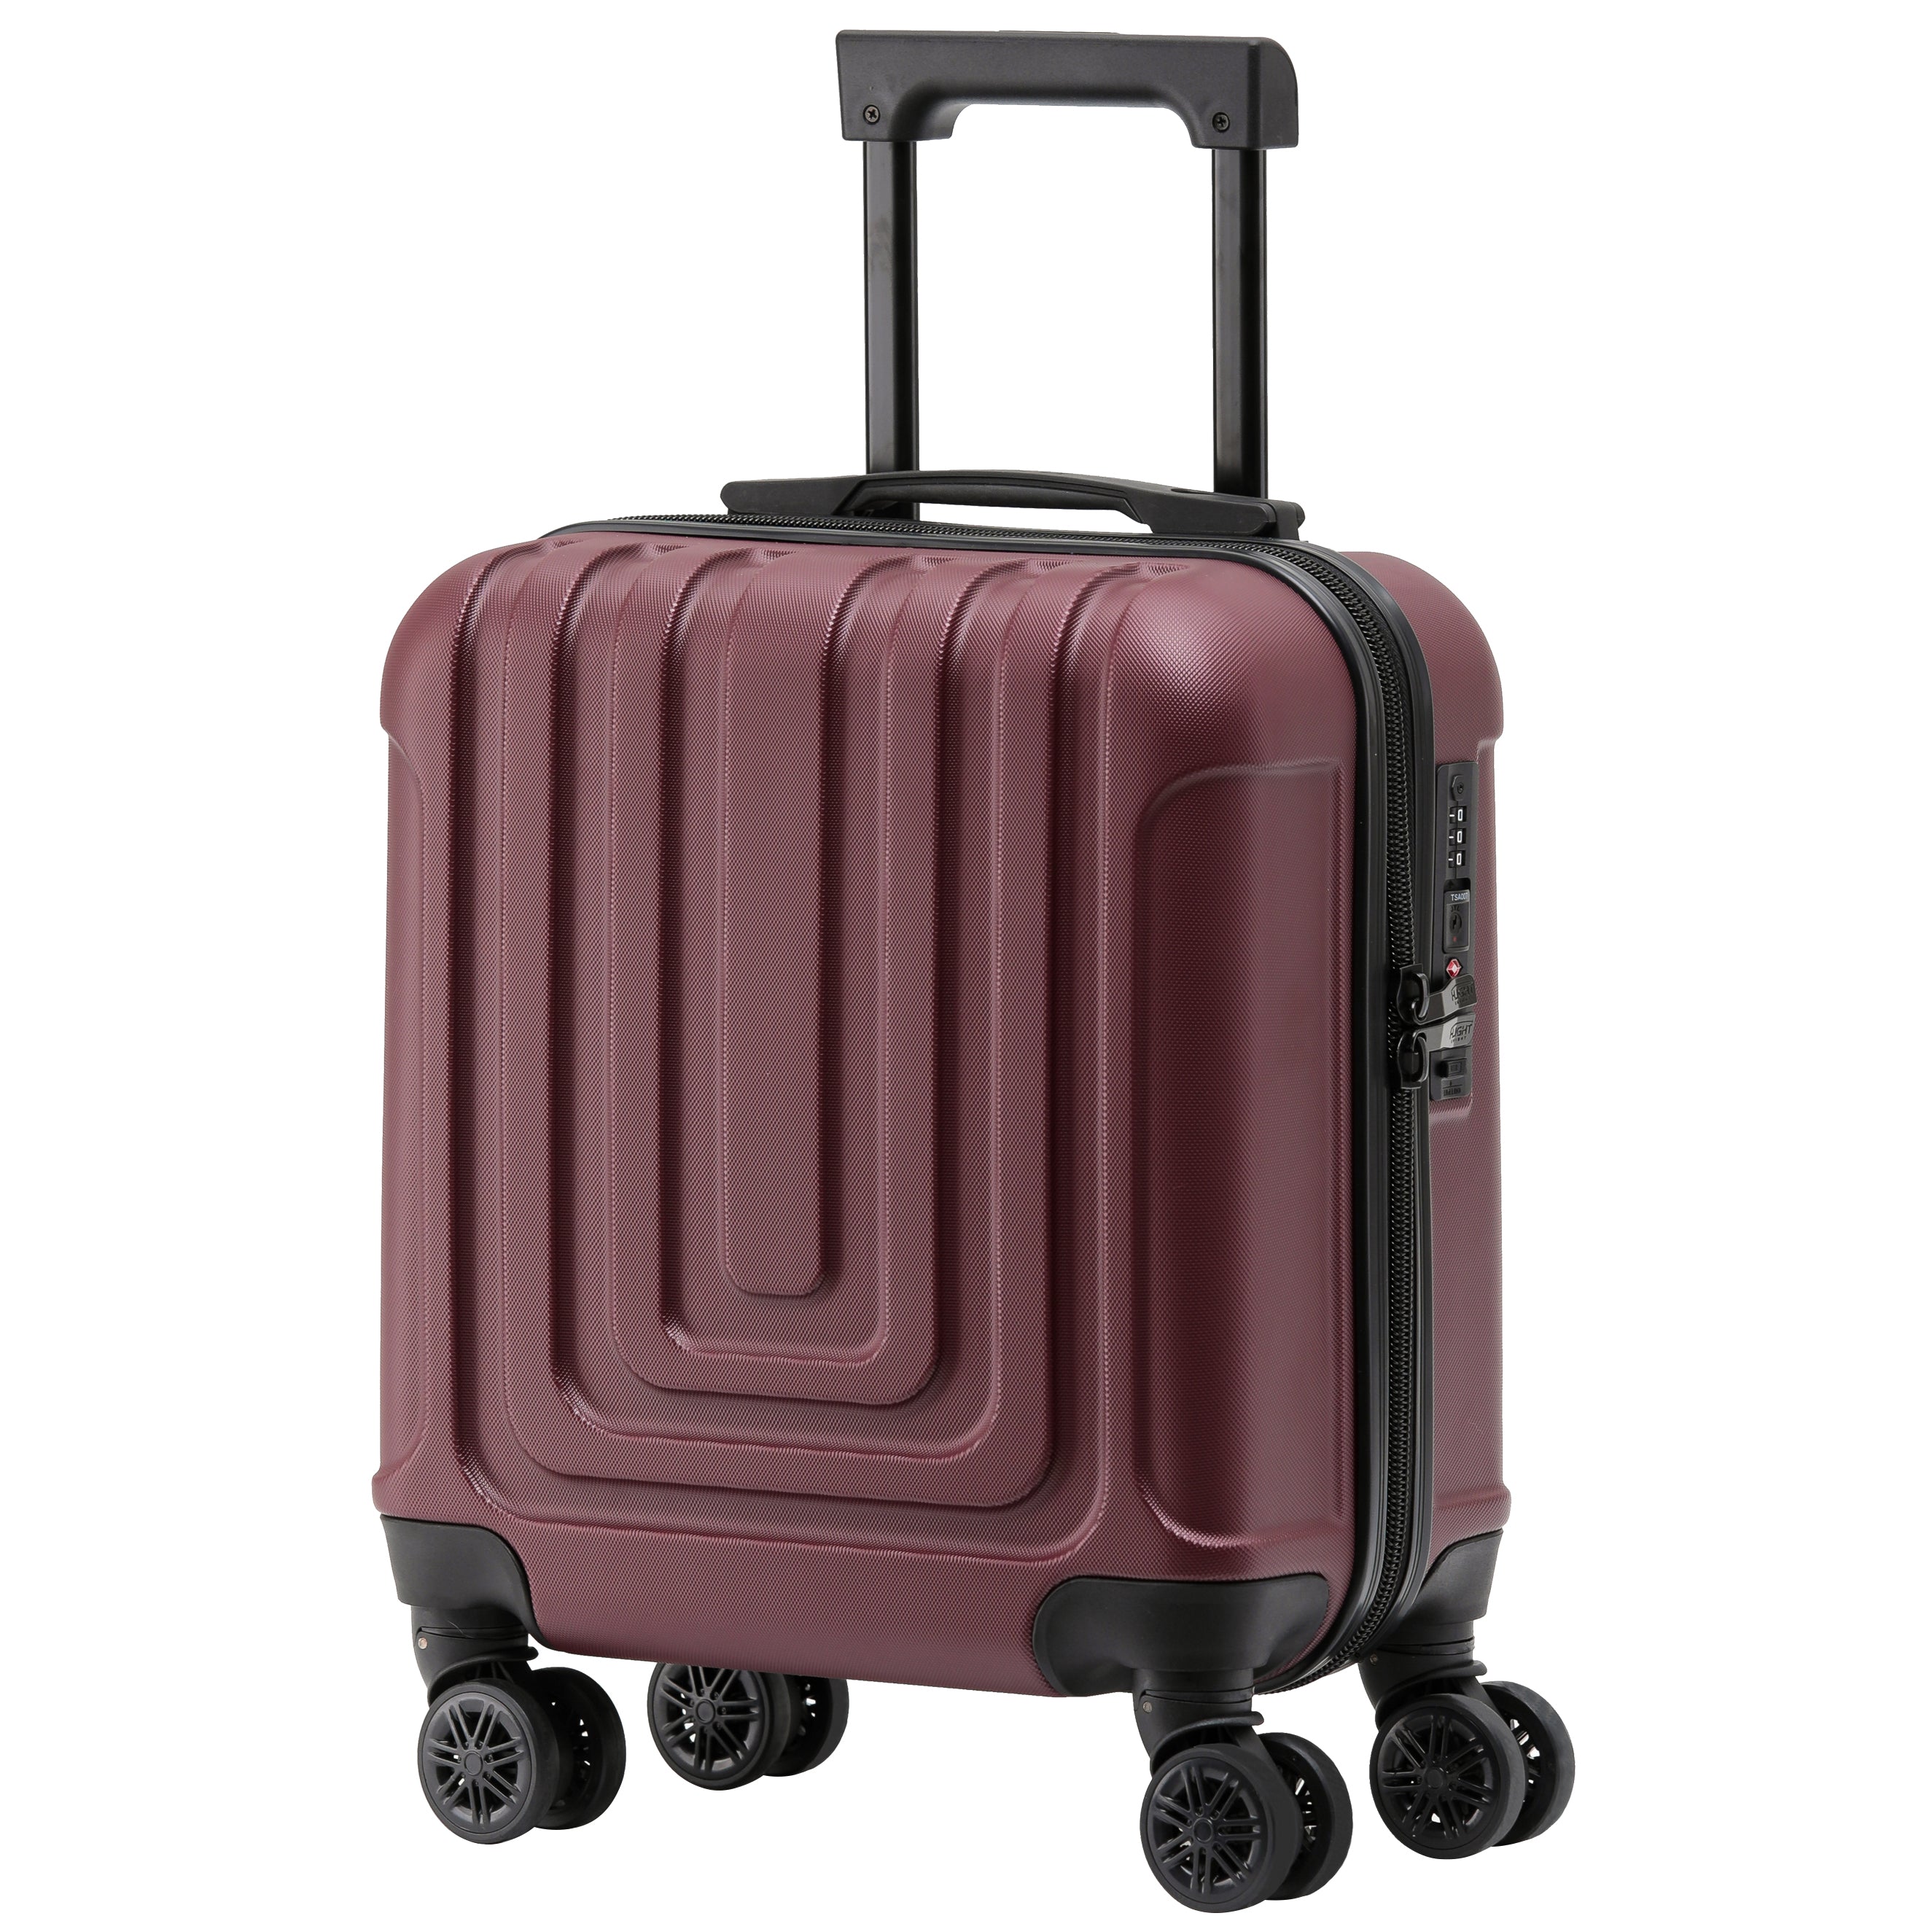 Load image into Gallery viewer, 45x36x20cm Premium Hard Shell Lightweight Cabin Suitcase - 8 Spinner Wheels - Built-in TSA Lock &amp;amp; USB Port - Luggage Approved for Over 100 Airlines Including easyJet Underseat
